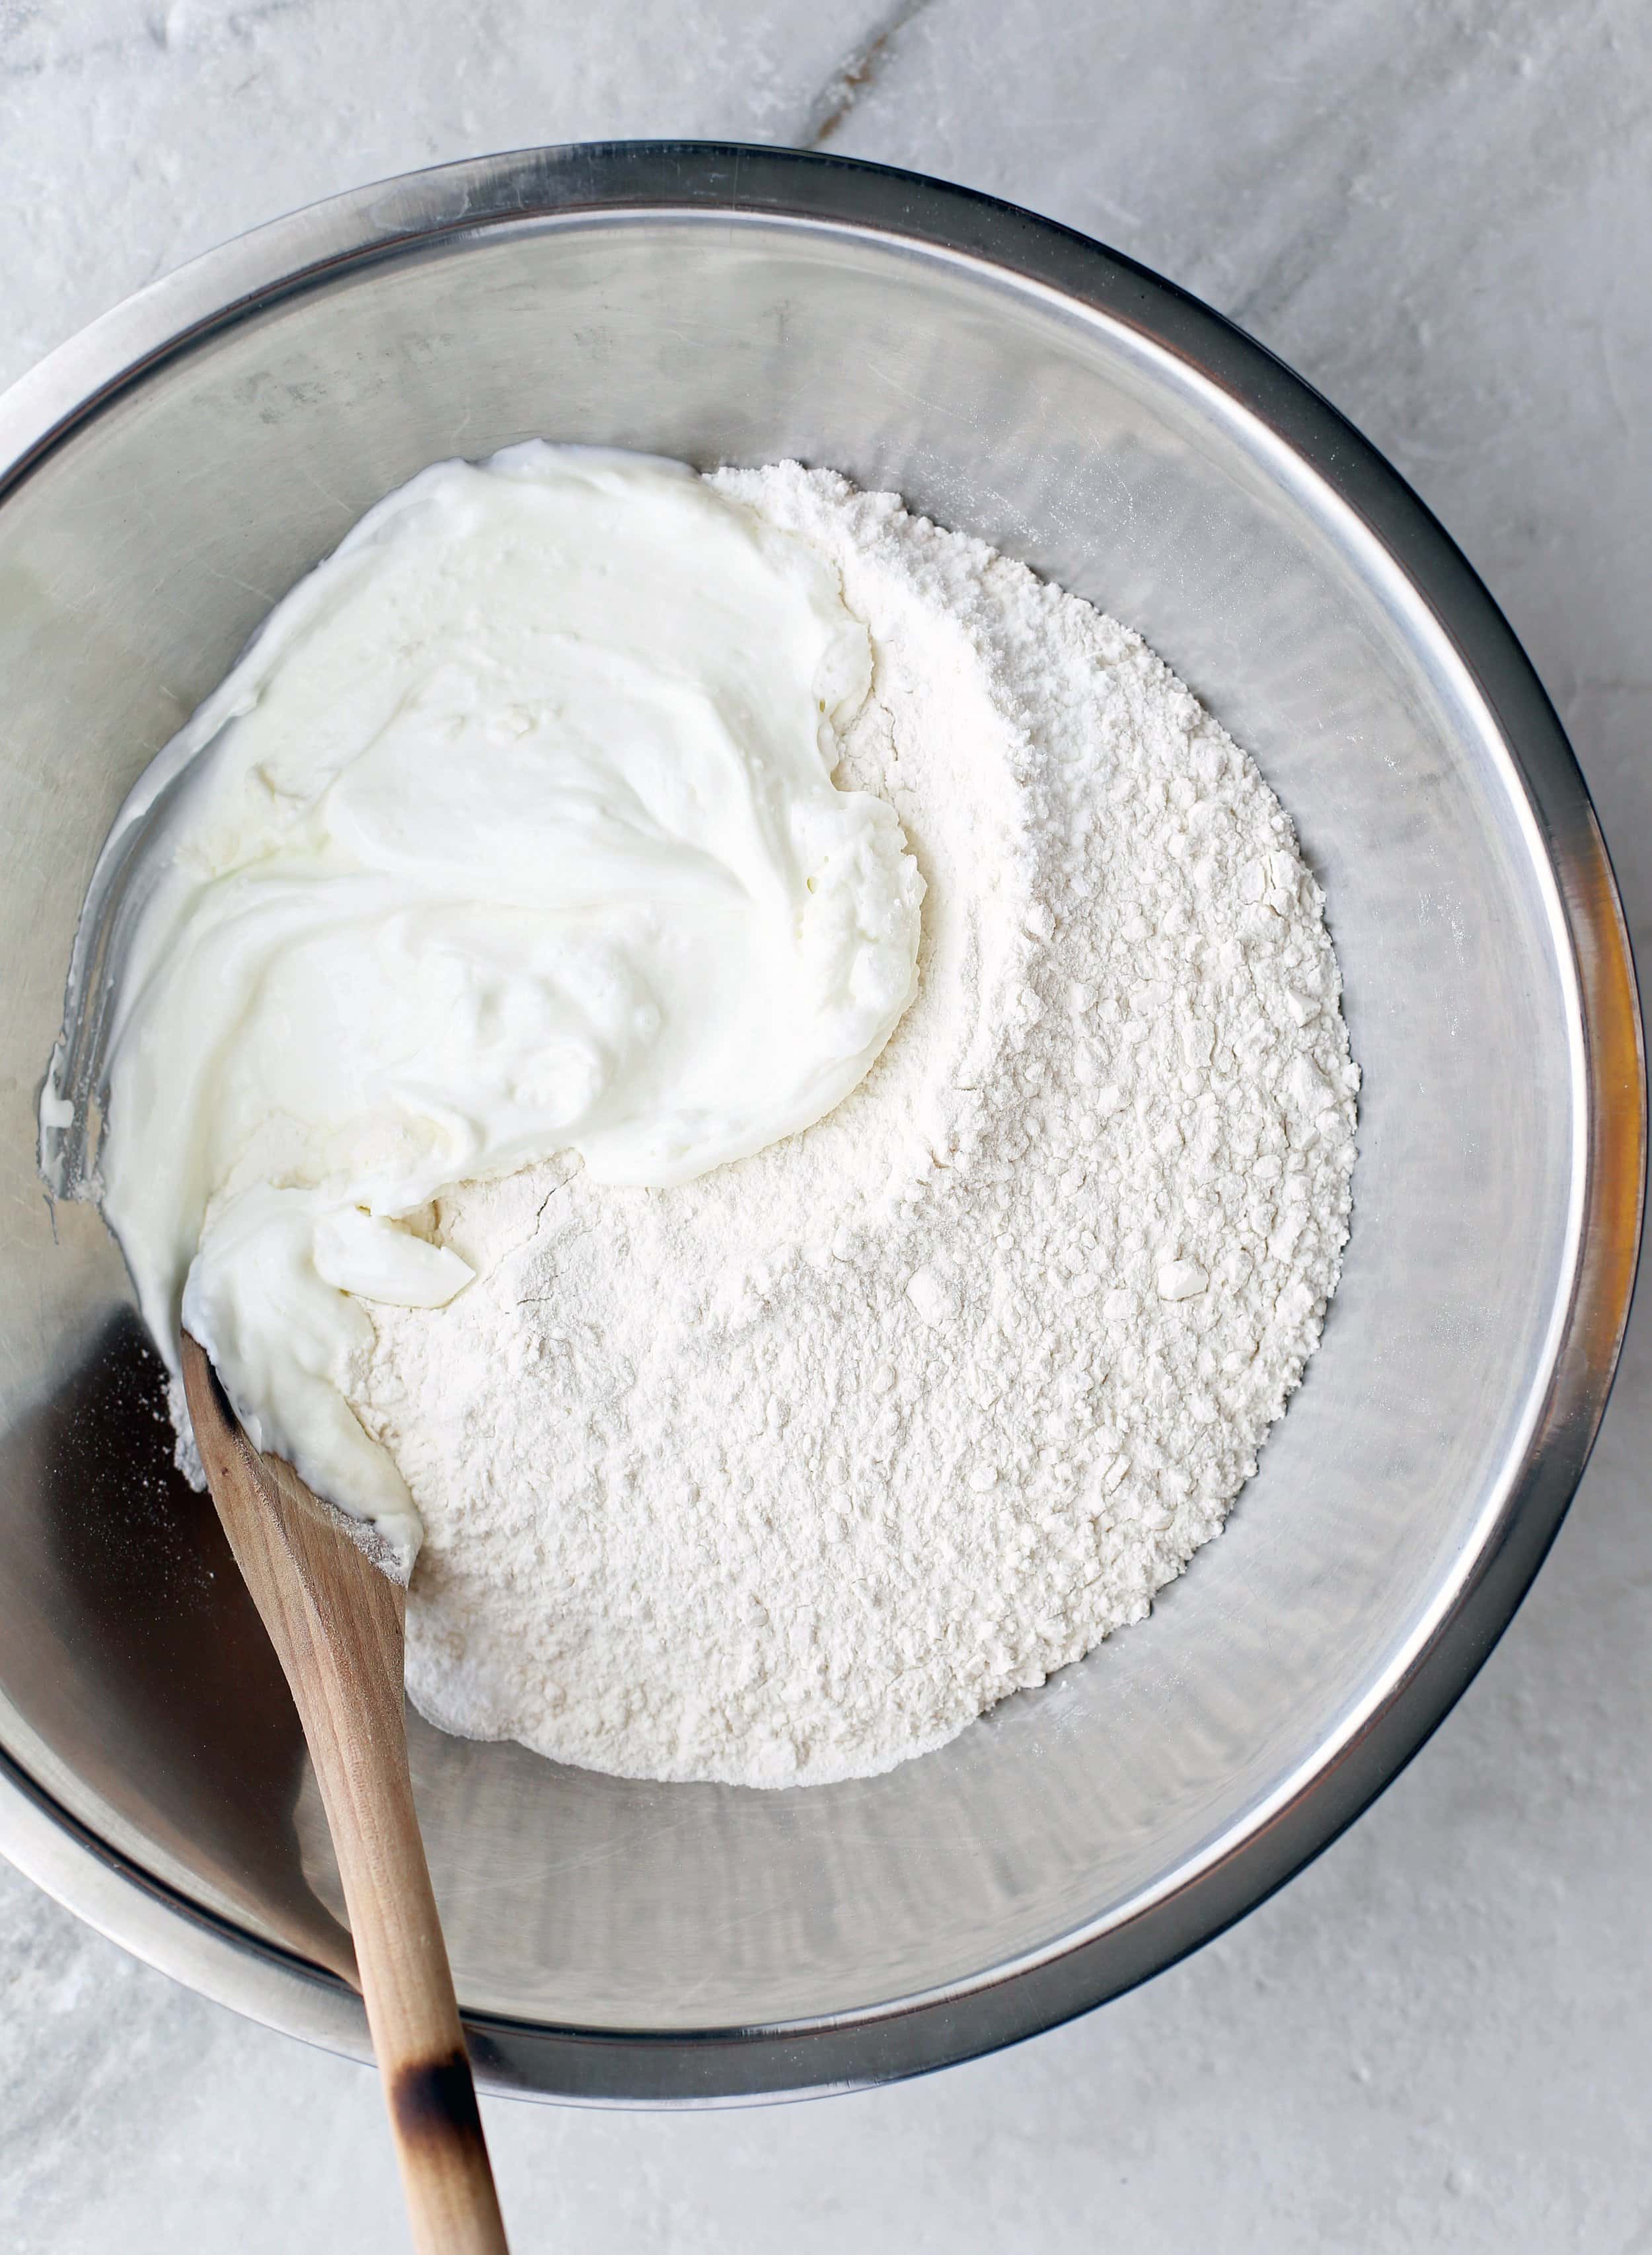 Greek yogurt, all-purpose flour, and baking powder in a large metal bowl with a wooden spoon.